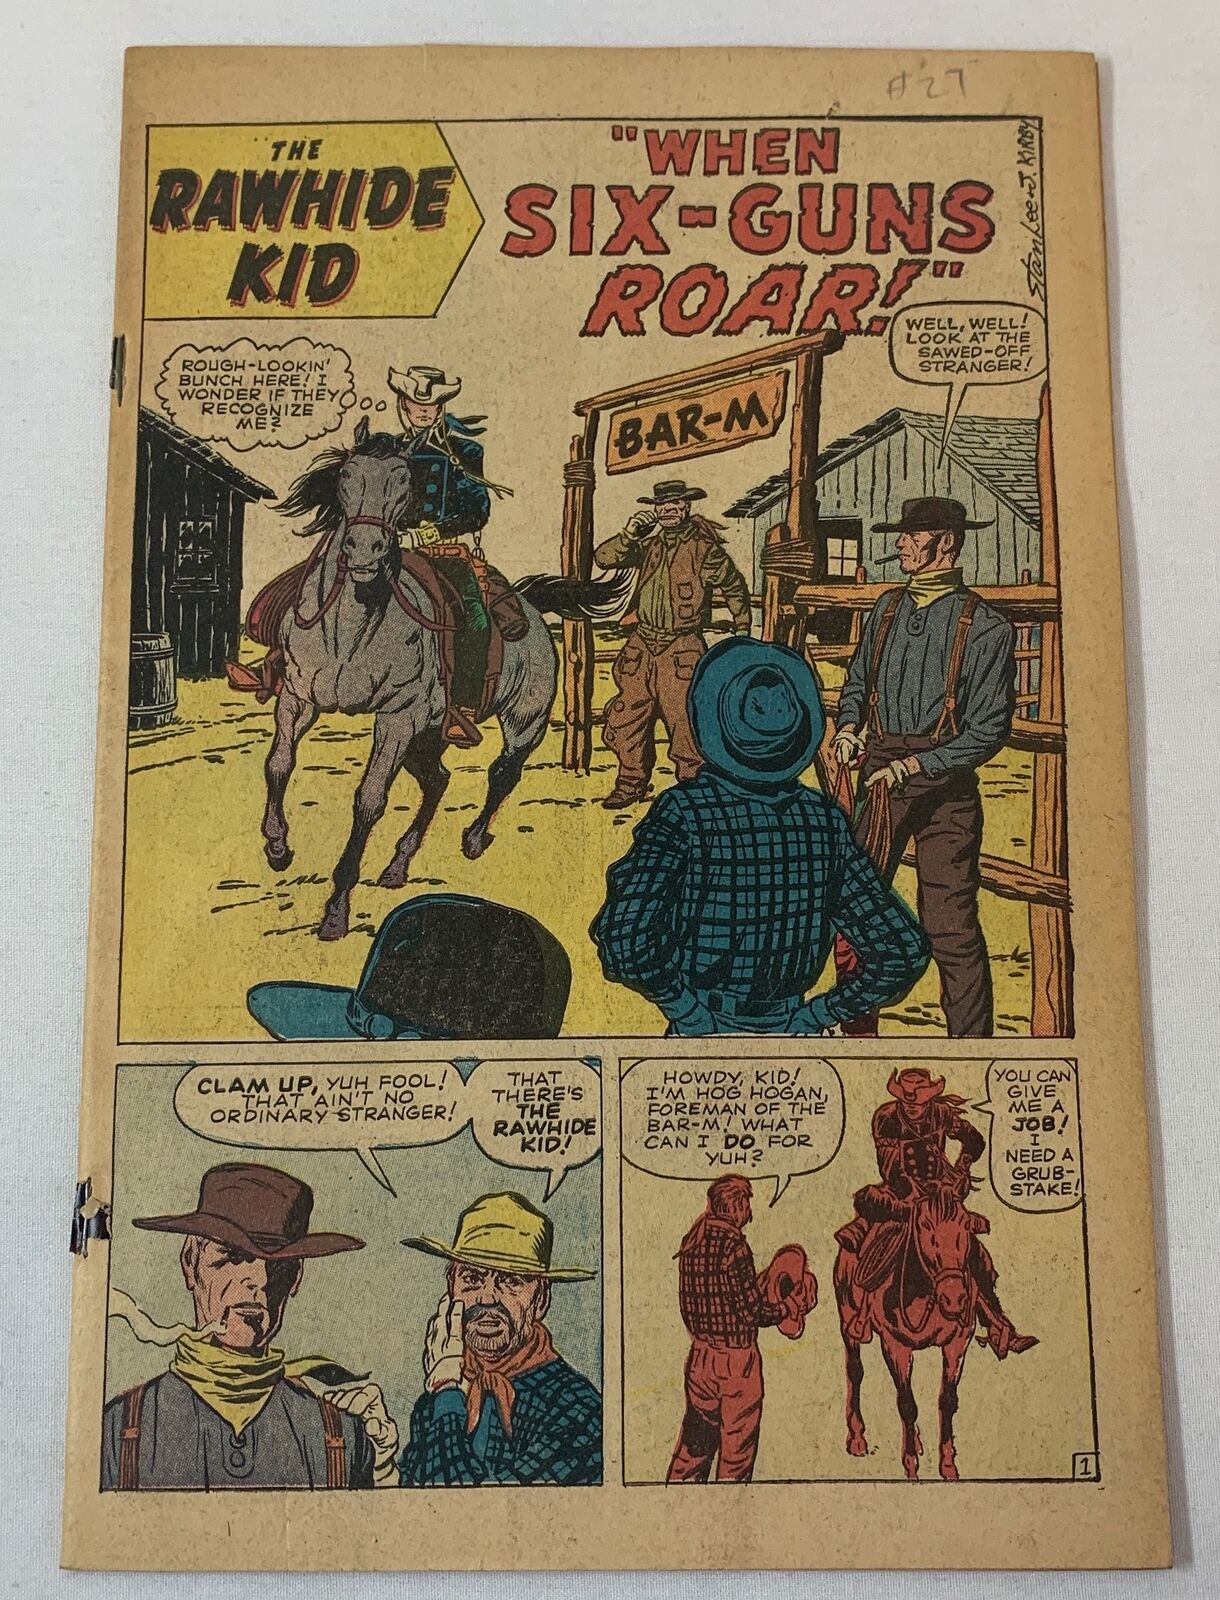 1962 RAWHIDE KID #27 ~ coverless, tear to first few pages